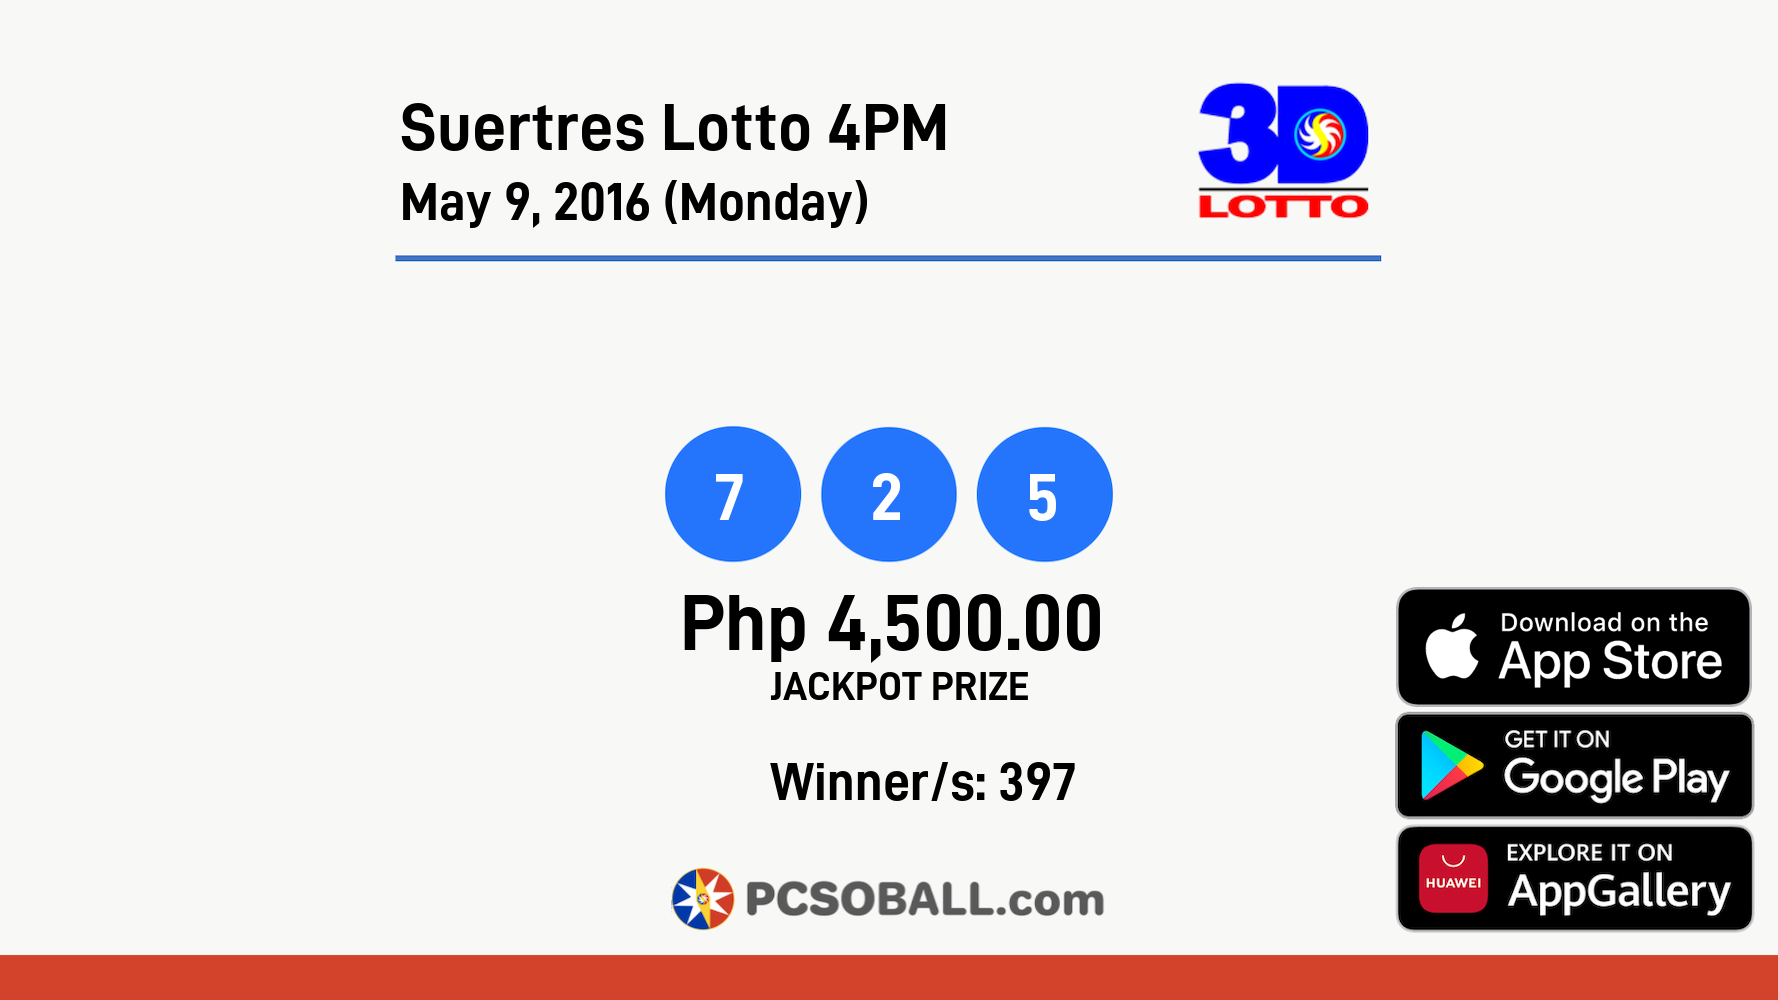 Suertres Lotto 4PM May 9, 2016 (Monday) Result